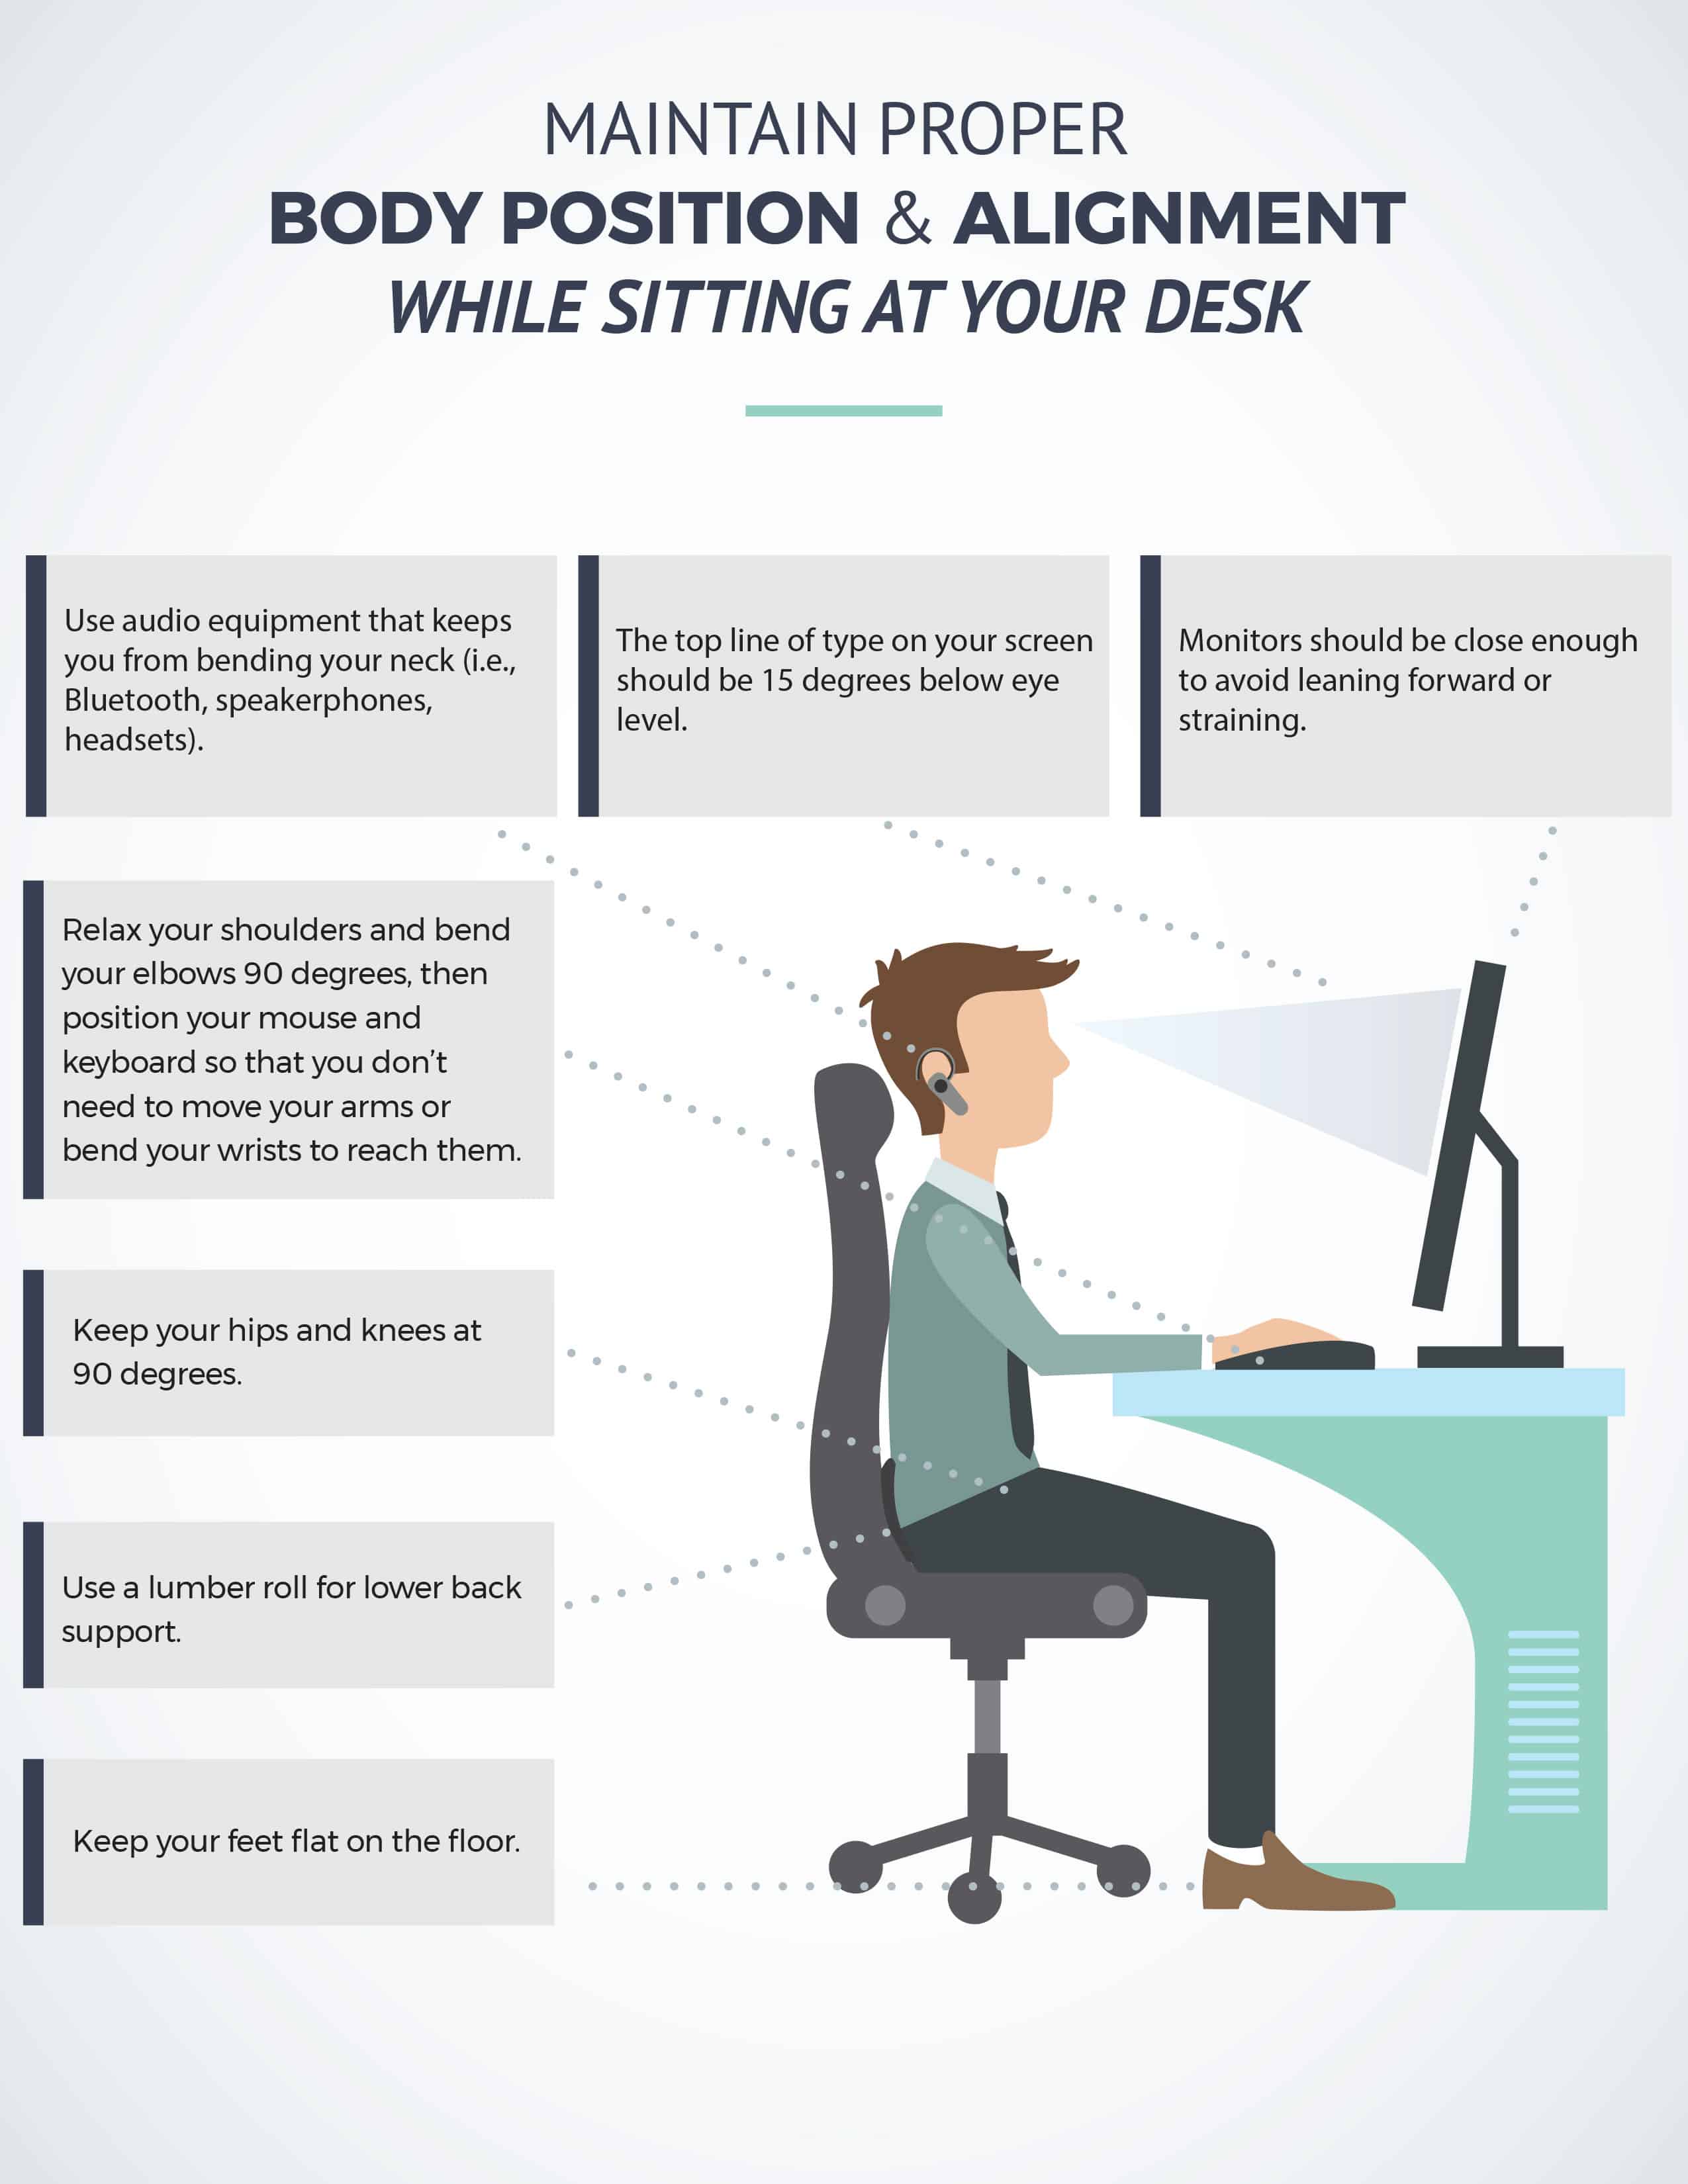 How to sit at your desk properly